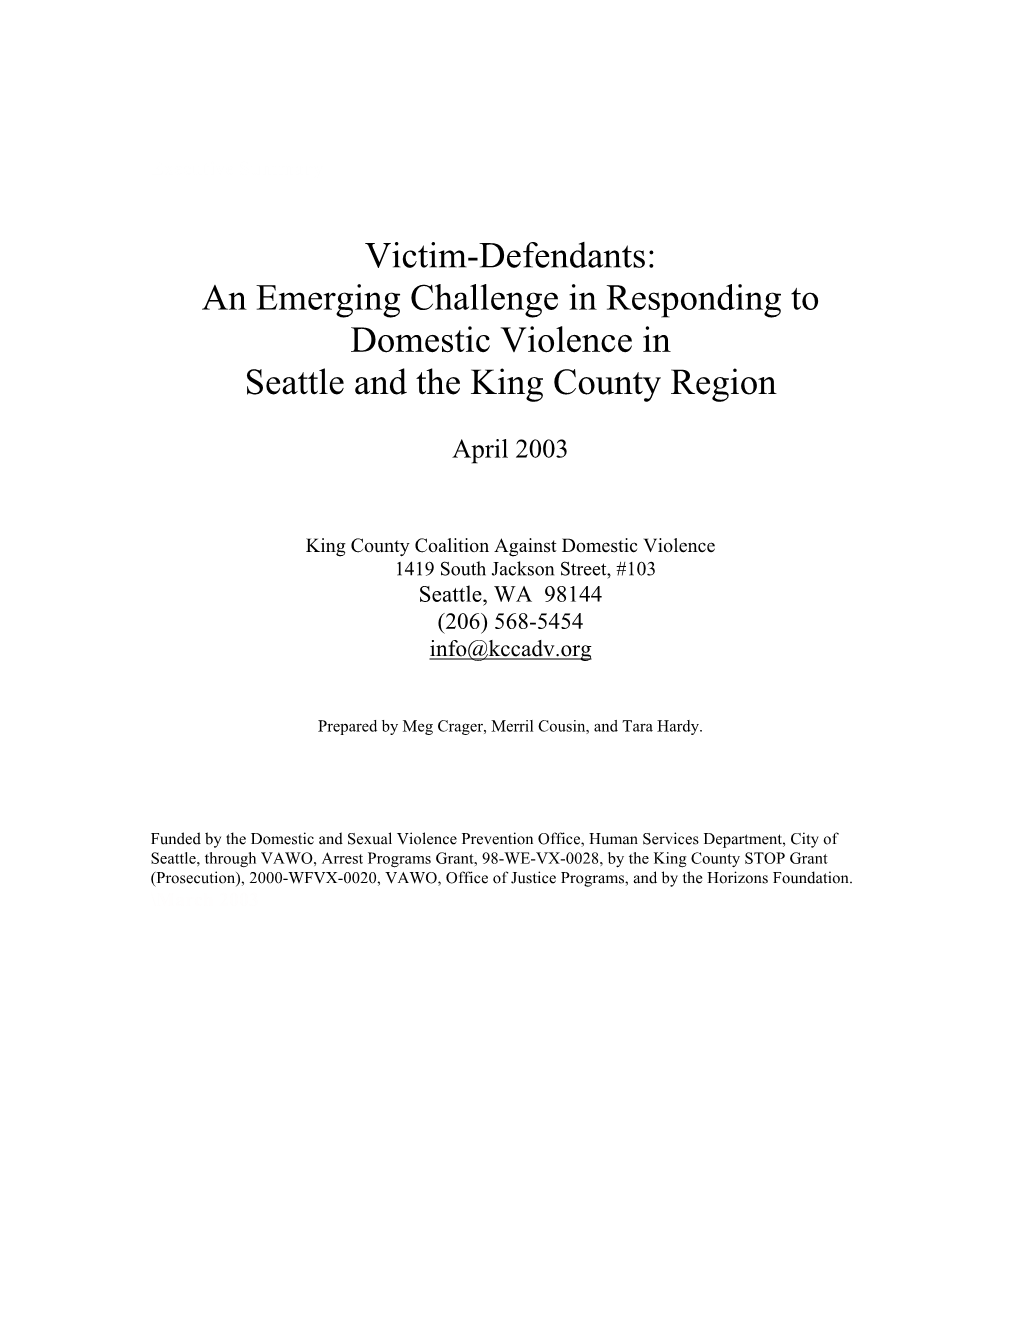 Victim Defendants: Responding to Domestic Violence in Seattle and the King County Region”